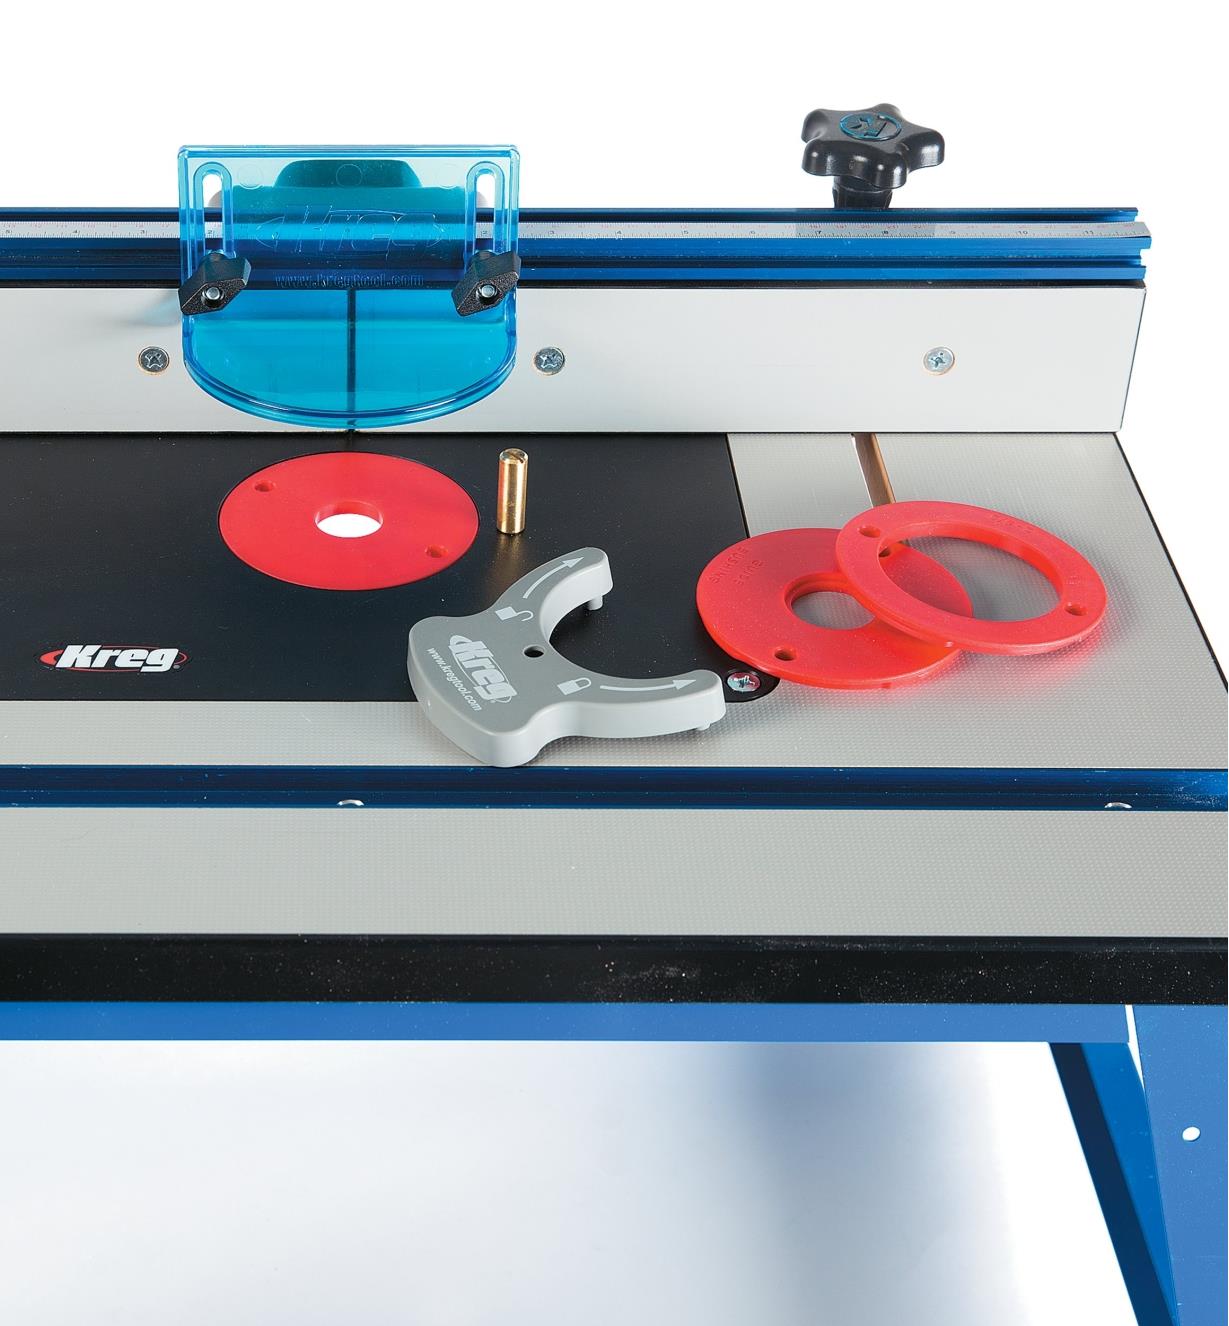 Kreg Precision Insert Plate inserted in a bench-top router table